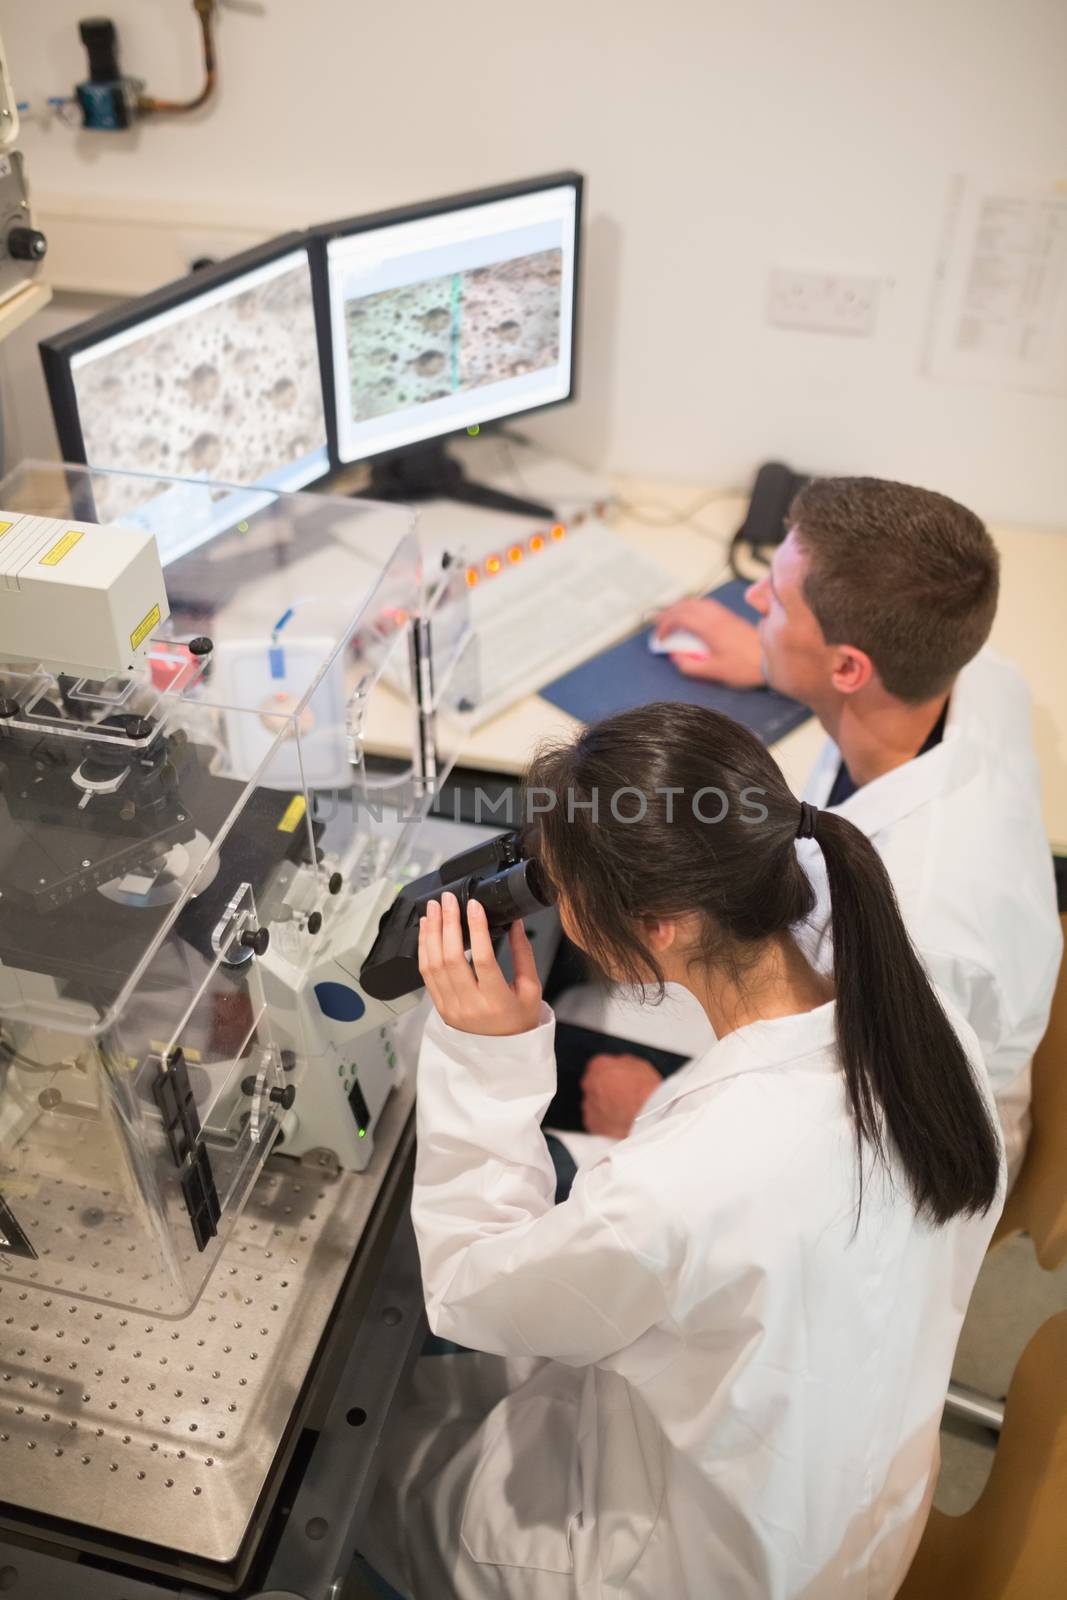 Biochemistry students using large microscope and computer by Wavebreakmedia